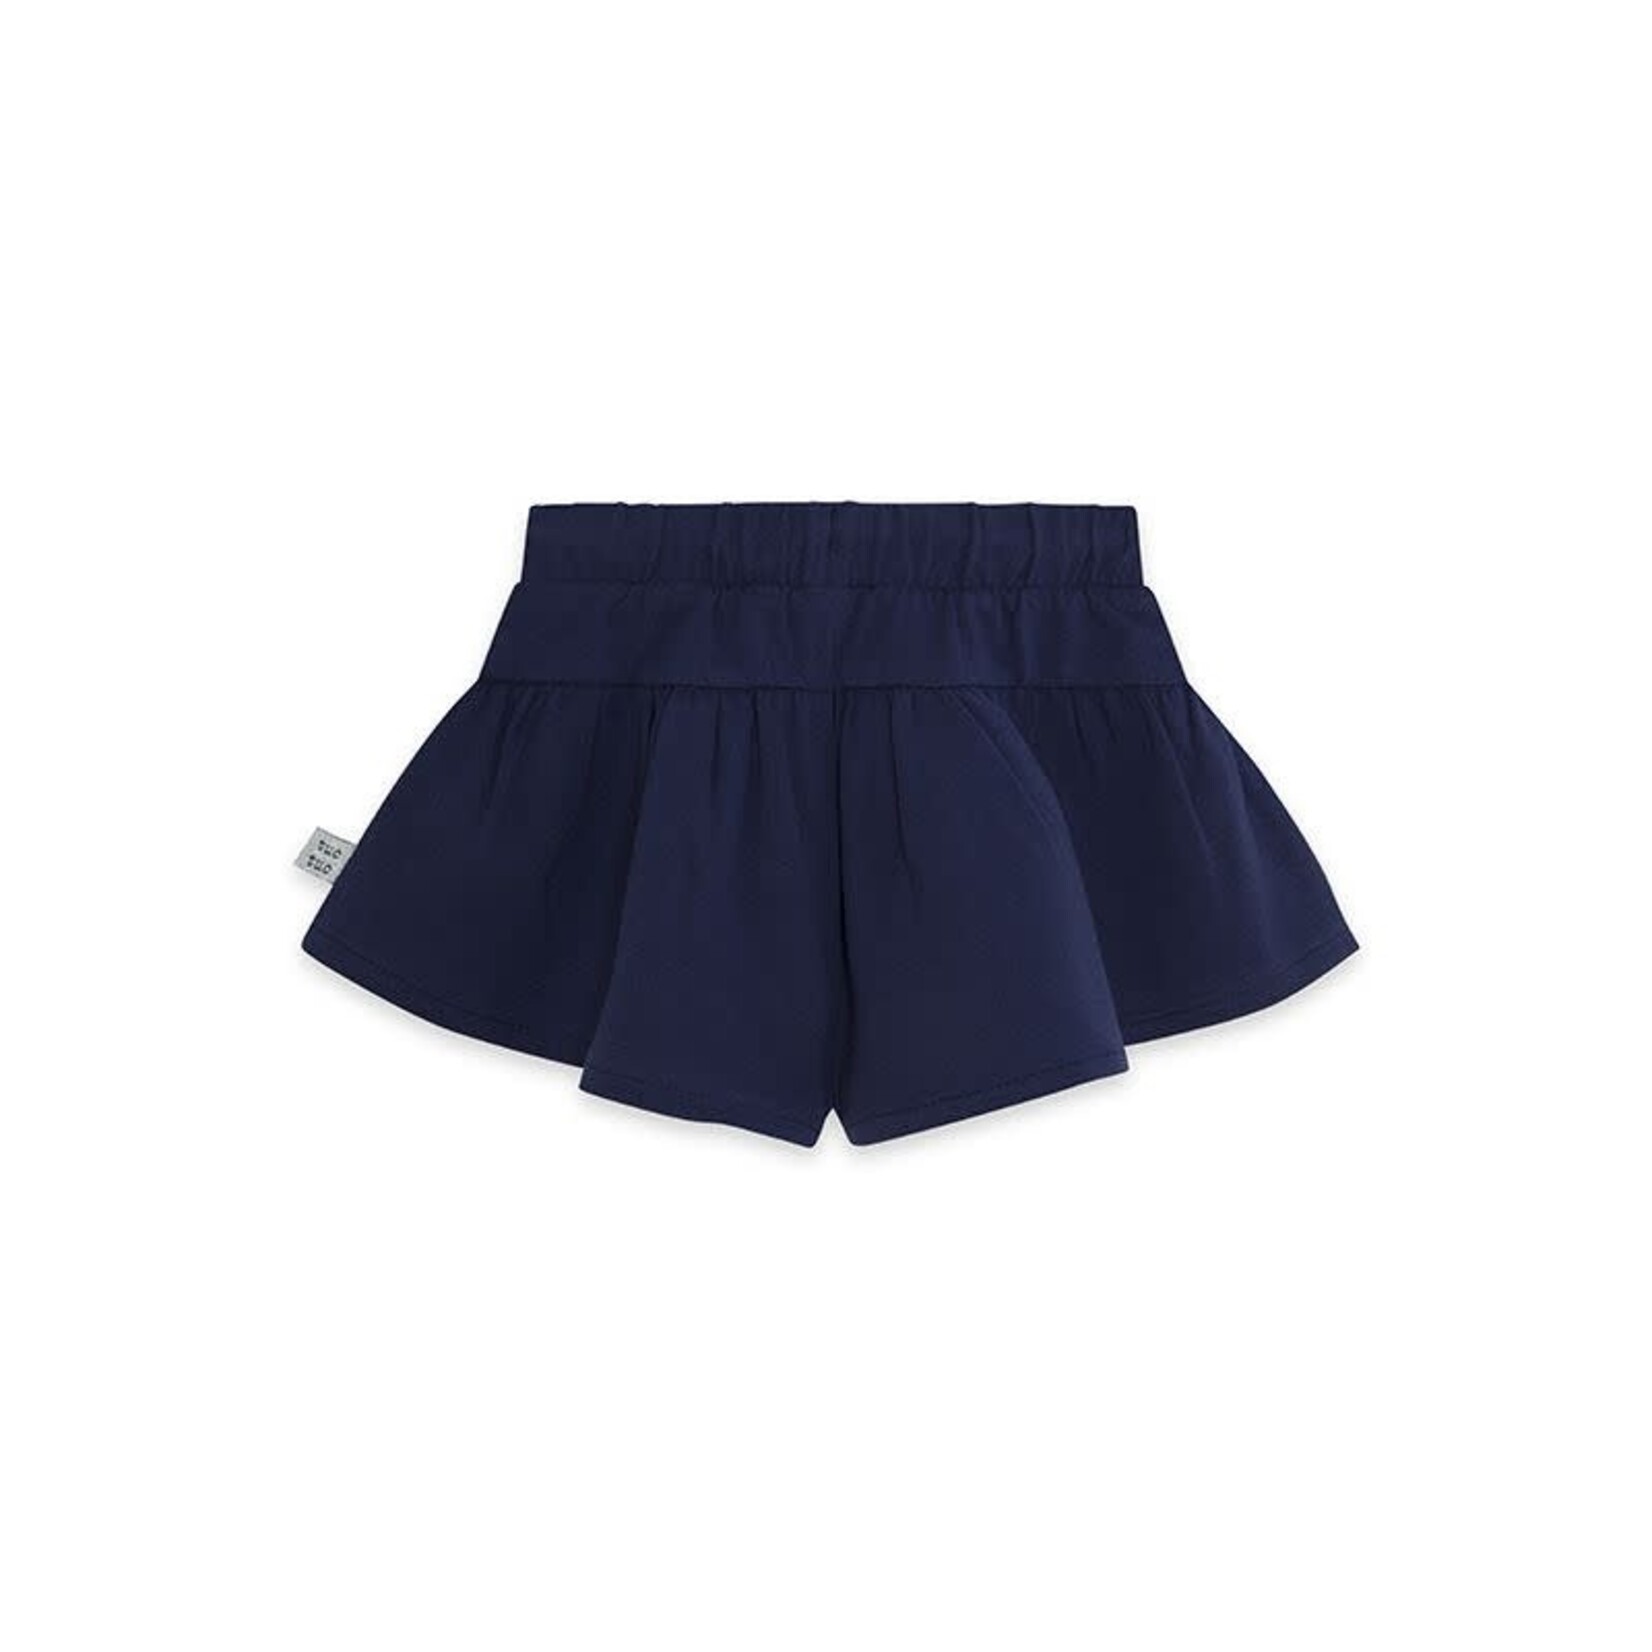 TucTuc TUC TUC - Navy jersey shorts with drawstring waist 'Basicos'